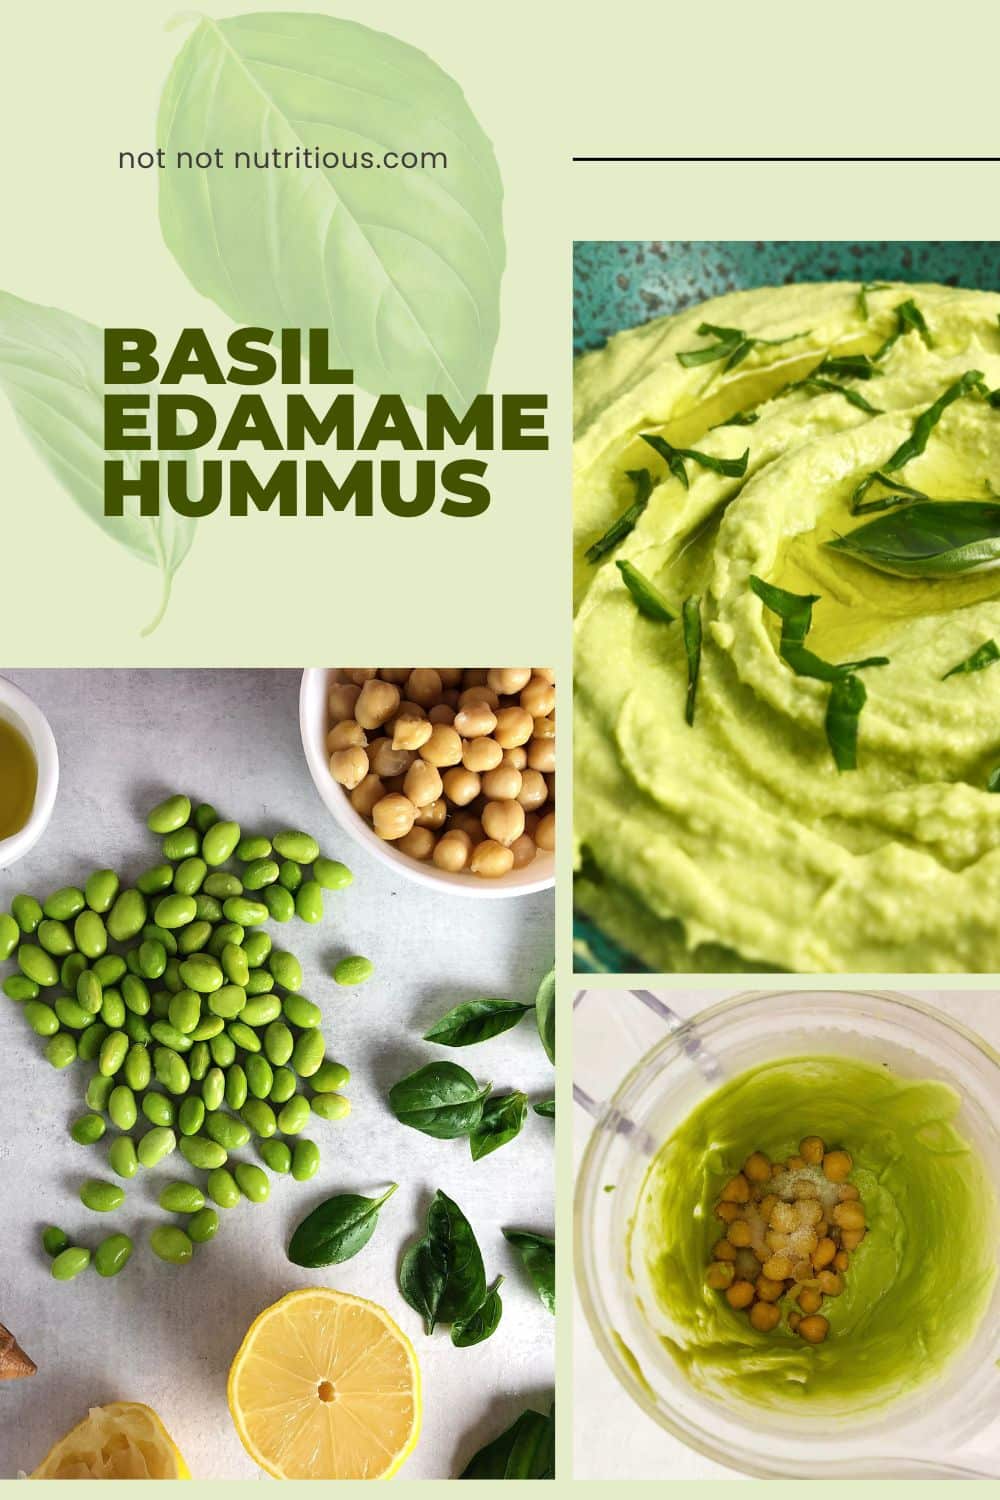 Pin for Basil Edamame Hummus with close up images of hummus, and ingredients: chickpeas, edamame beans, lemon, basil, and oil